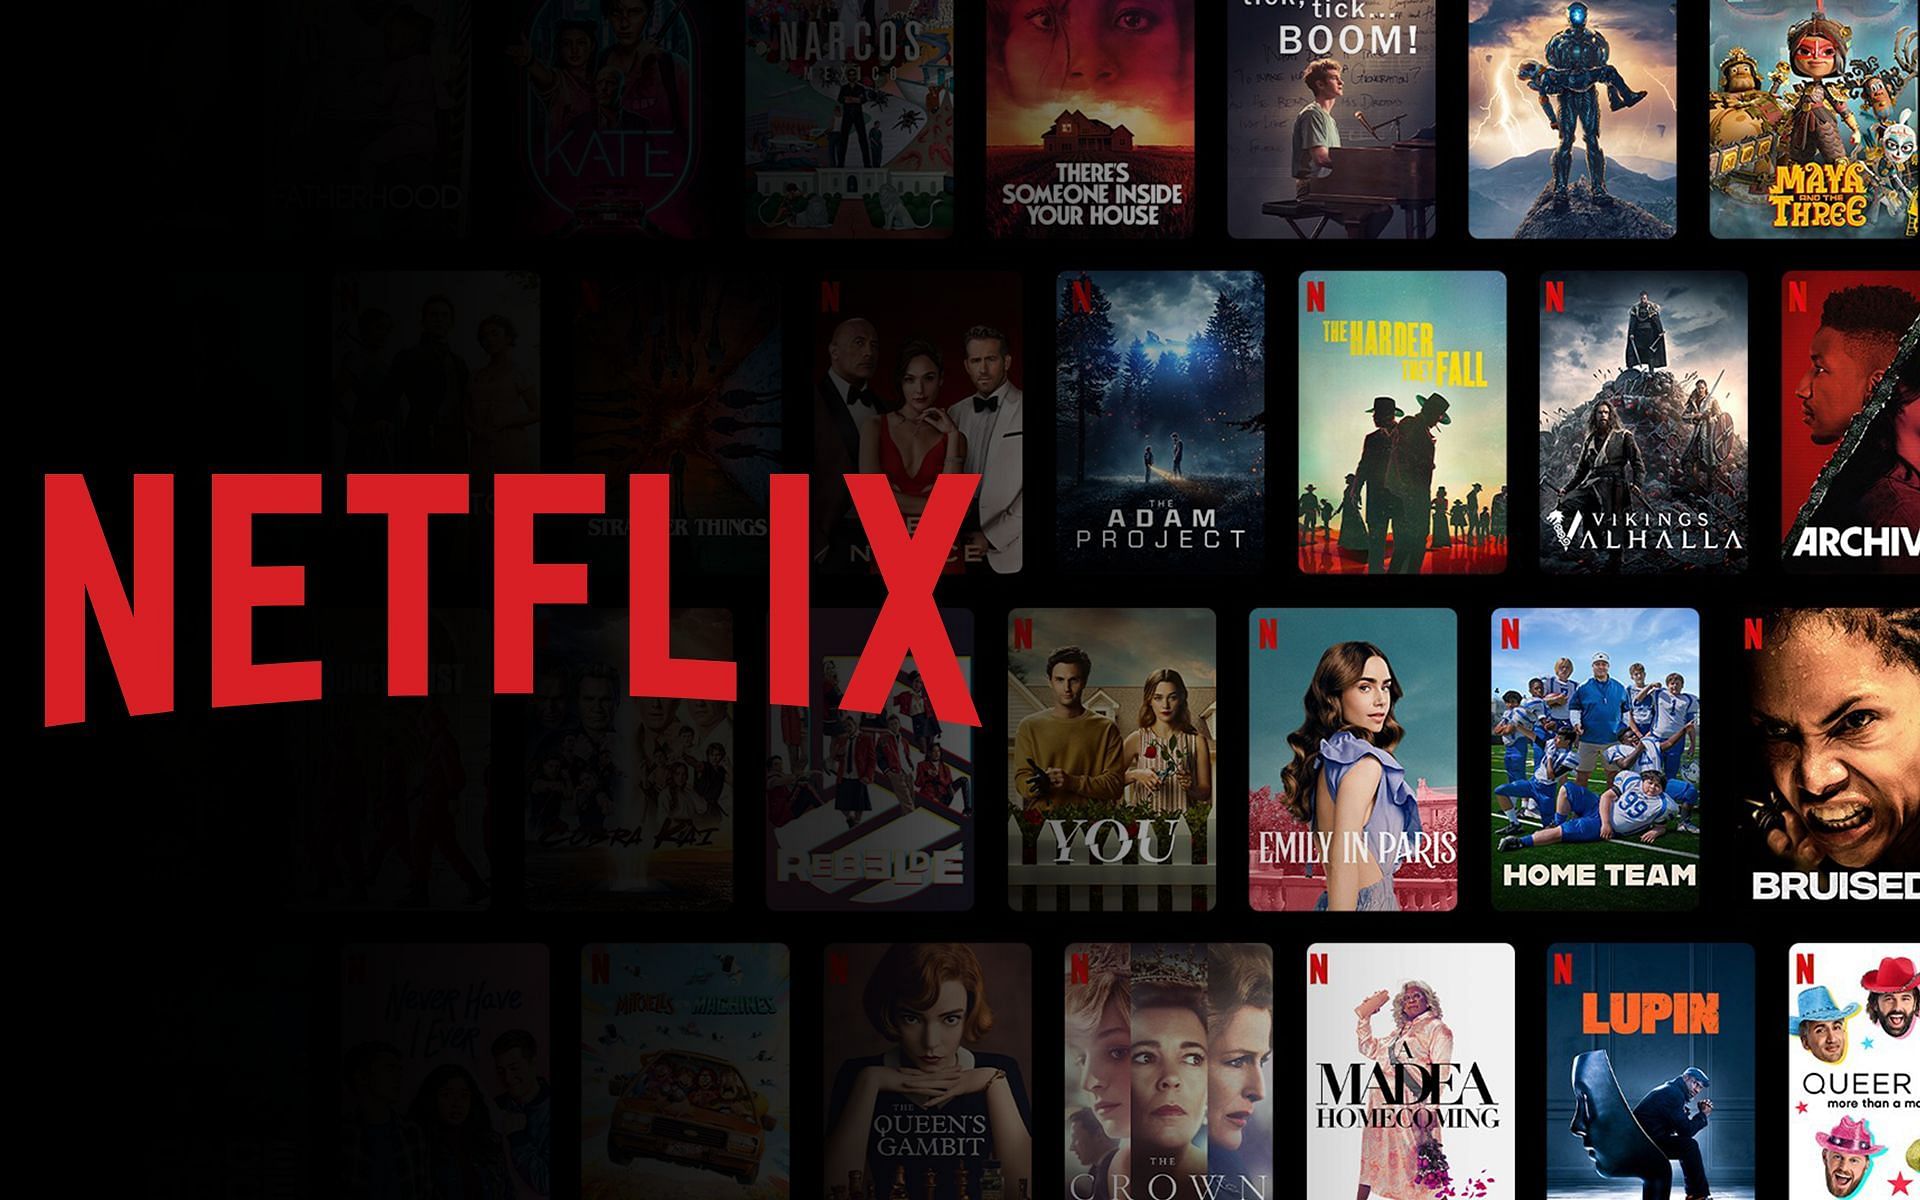 Netflix introduces the &#039;Two Thumbs Up&#039; rating option for our favorite TV shows and movies (Image via Netflix)